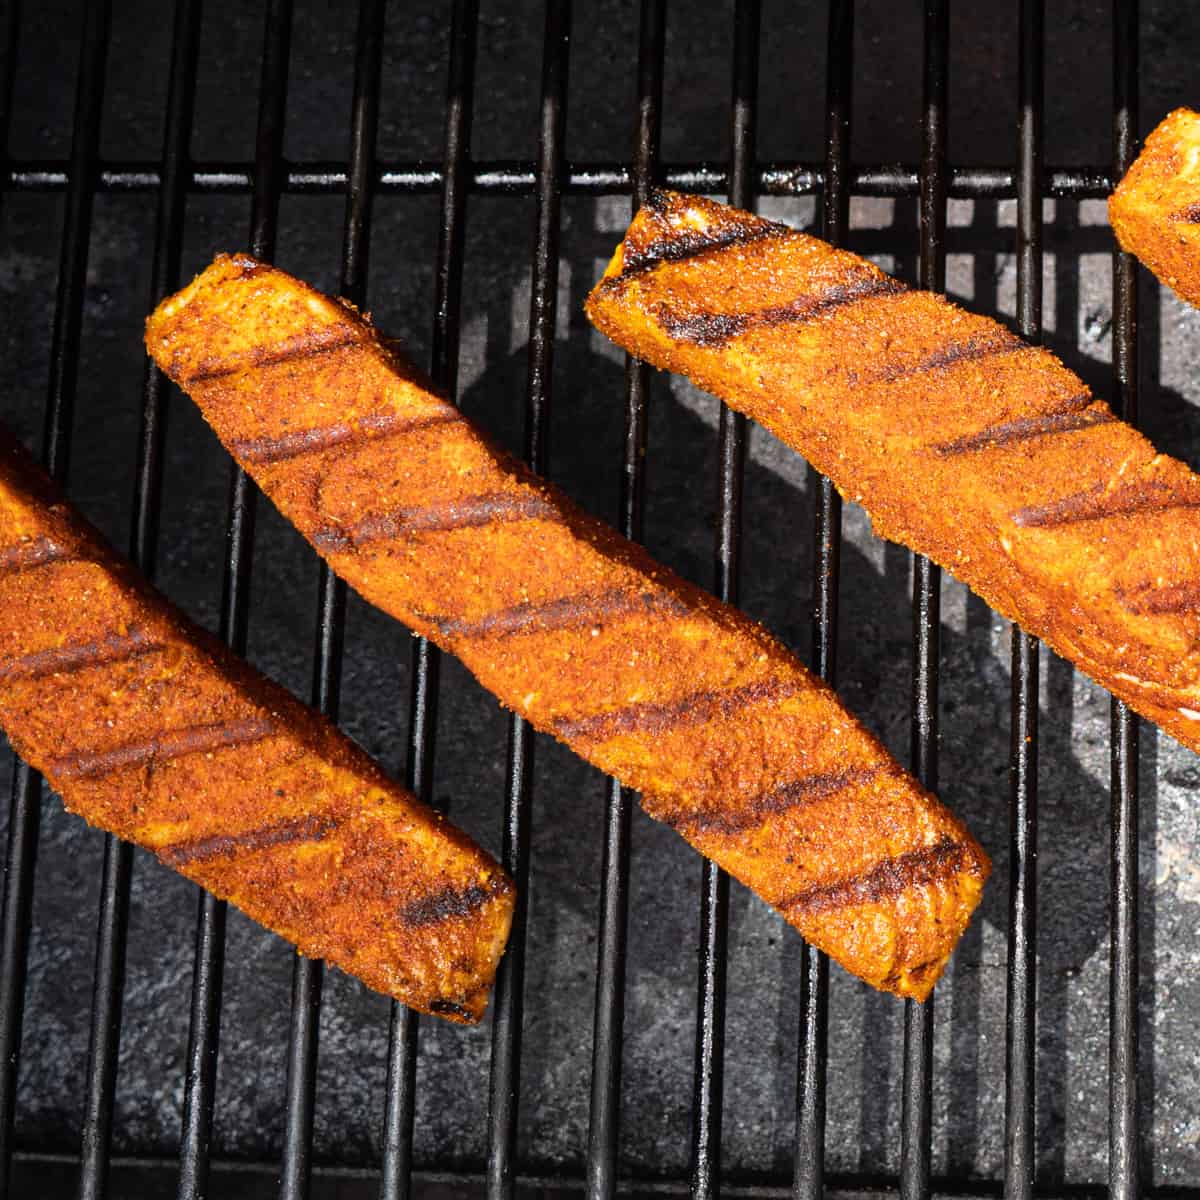 salmon skin side down on the grill.